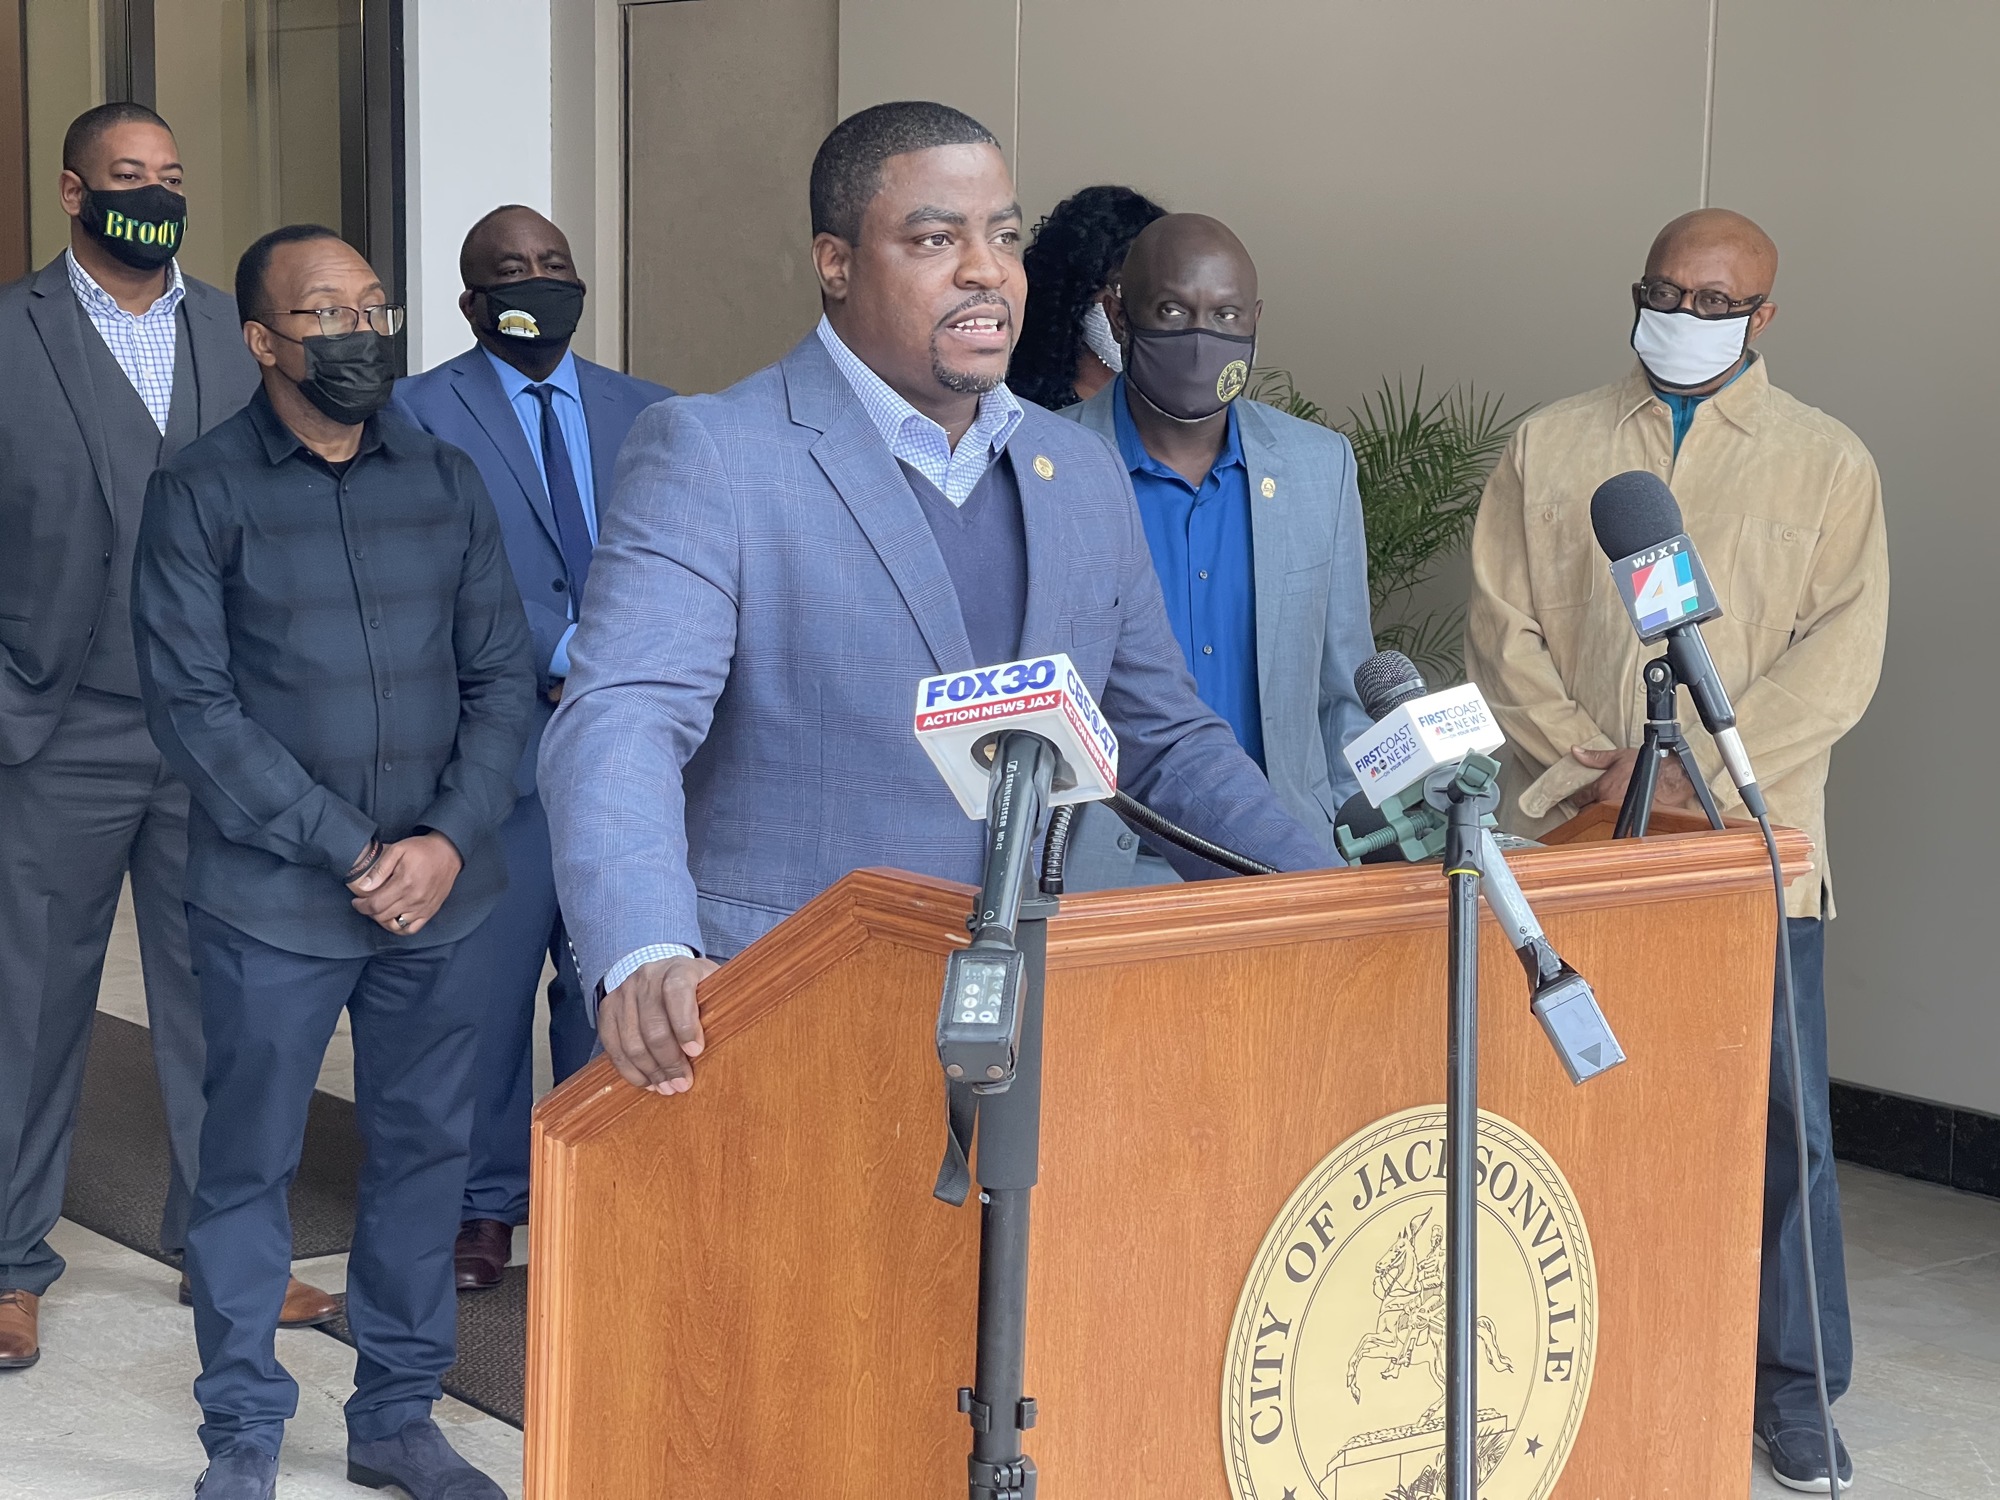 Central First Church of God in Christ Pastor Terrance Brisbane Sr.  speaks at the news conference, which was attended by business and community leaders.